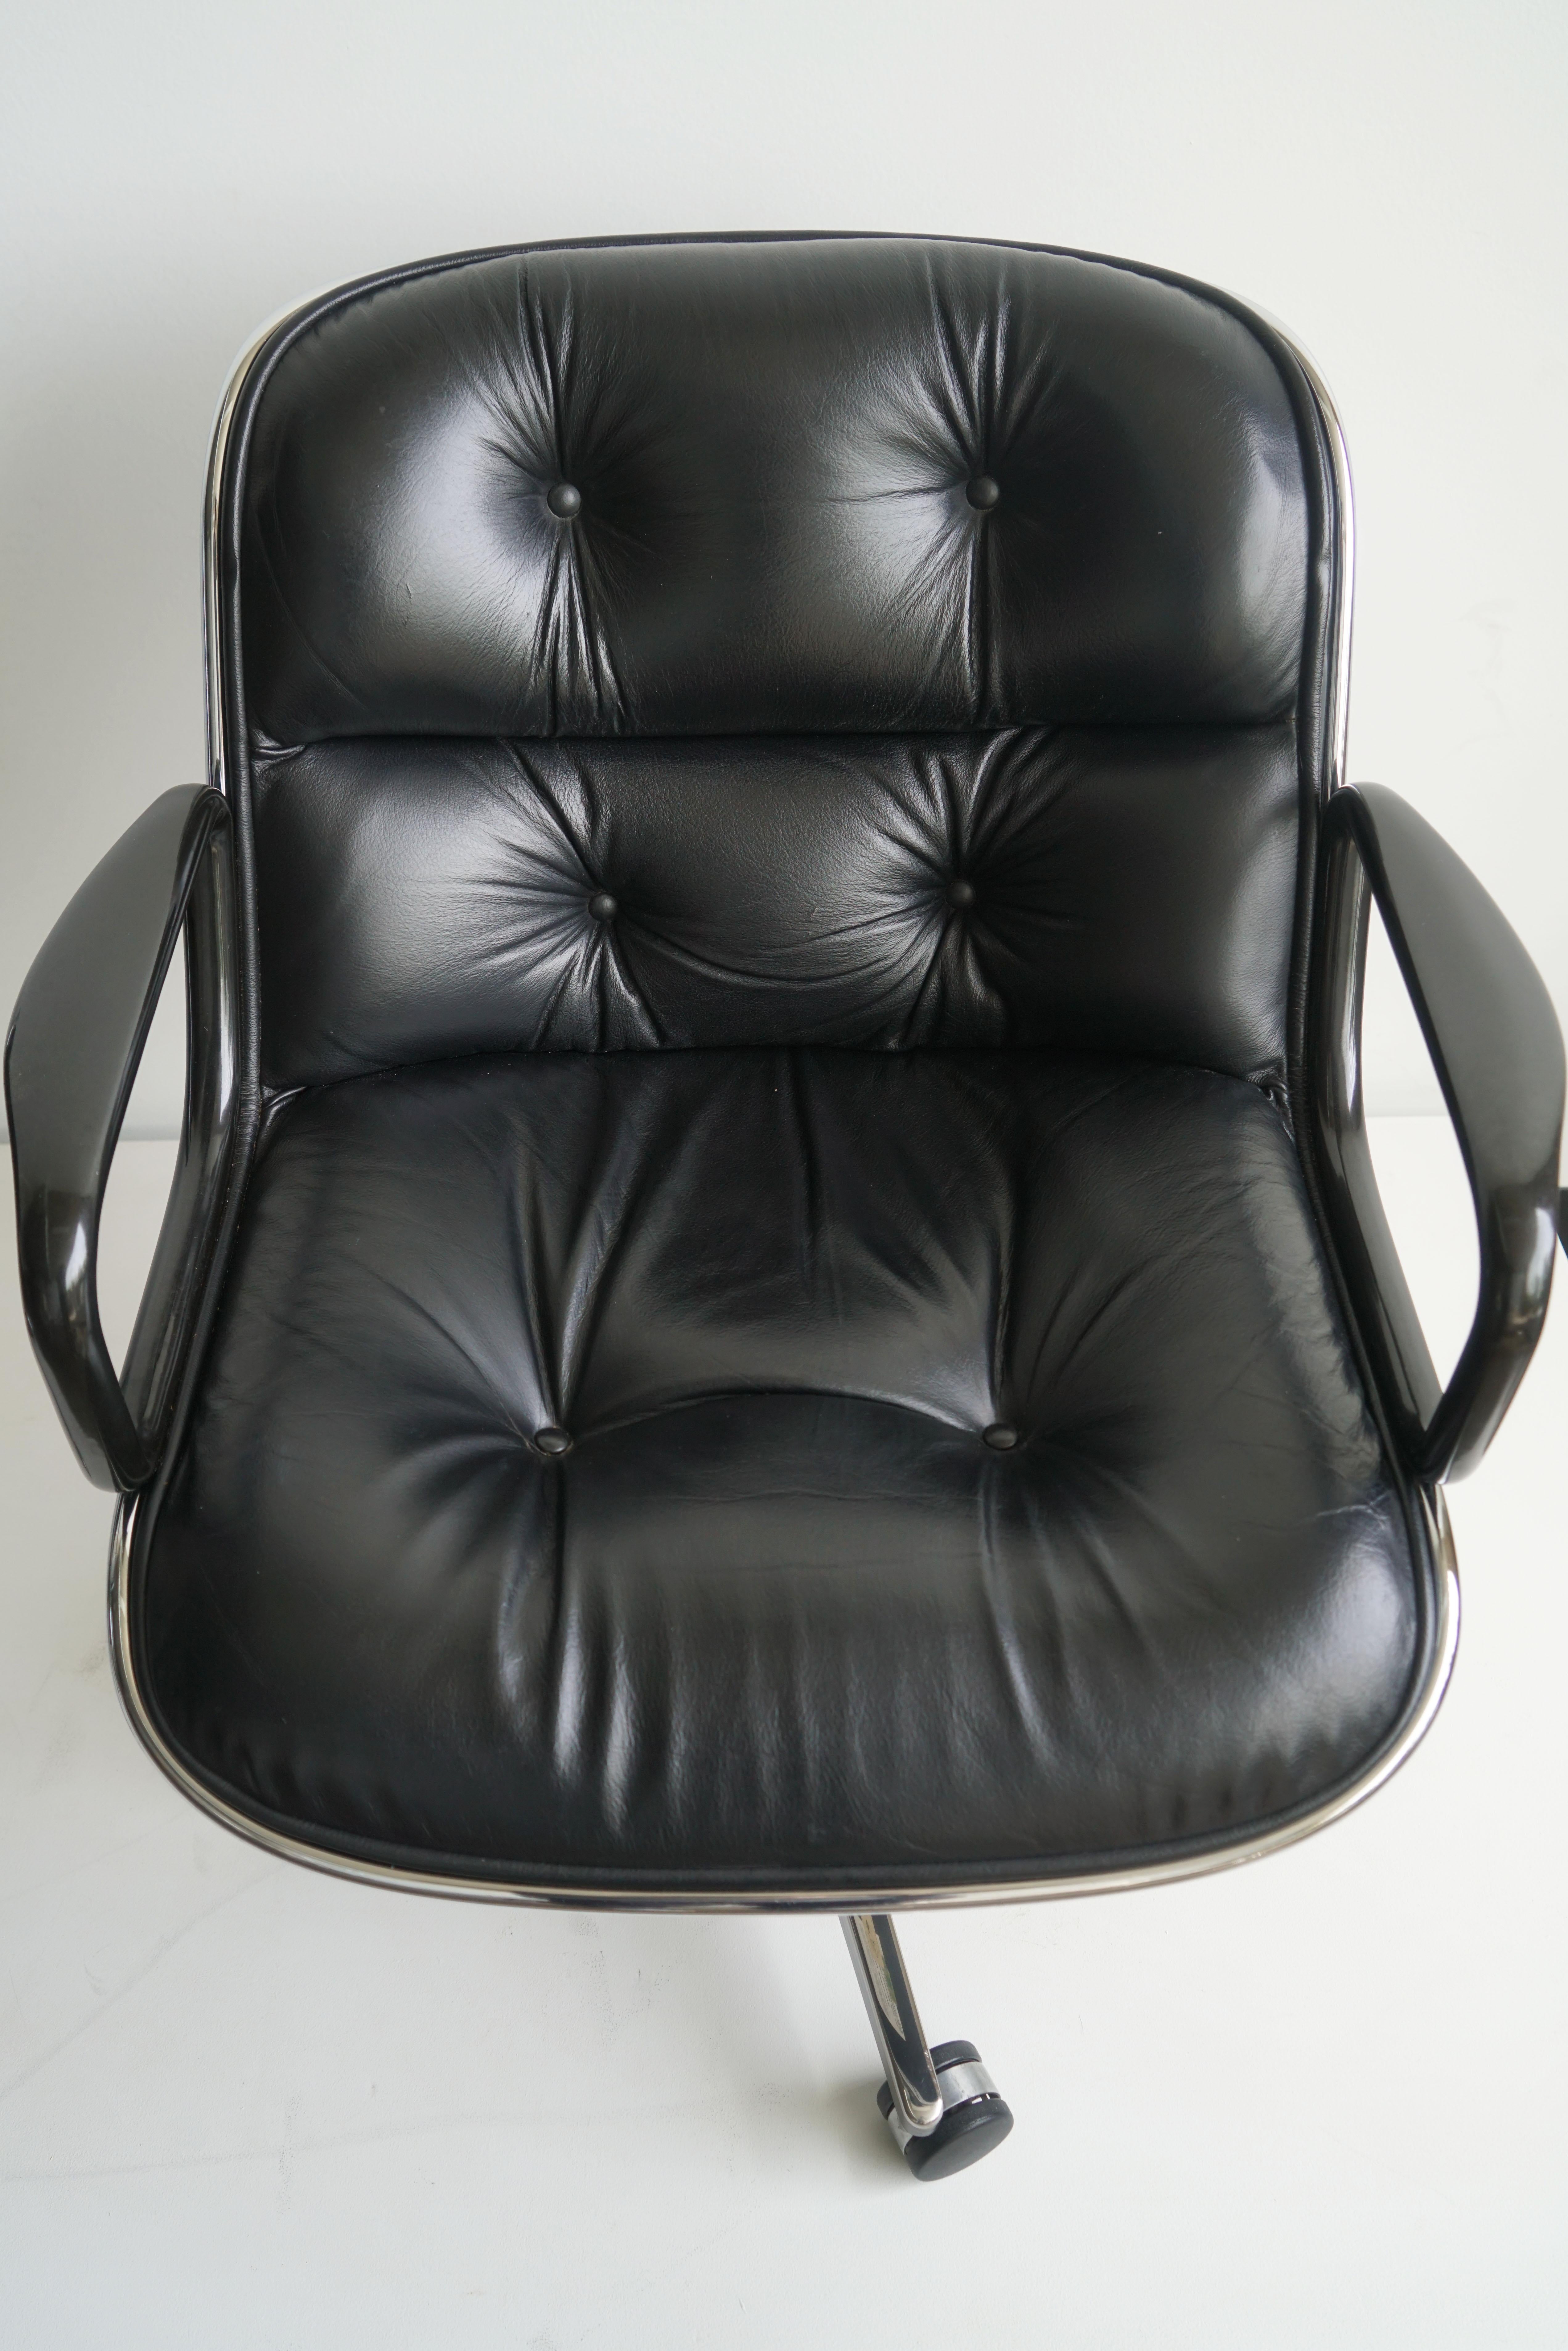 Mid-Century Modern Knoll Charles Pollock Executive Desk Chairs in Black Leather For Sale